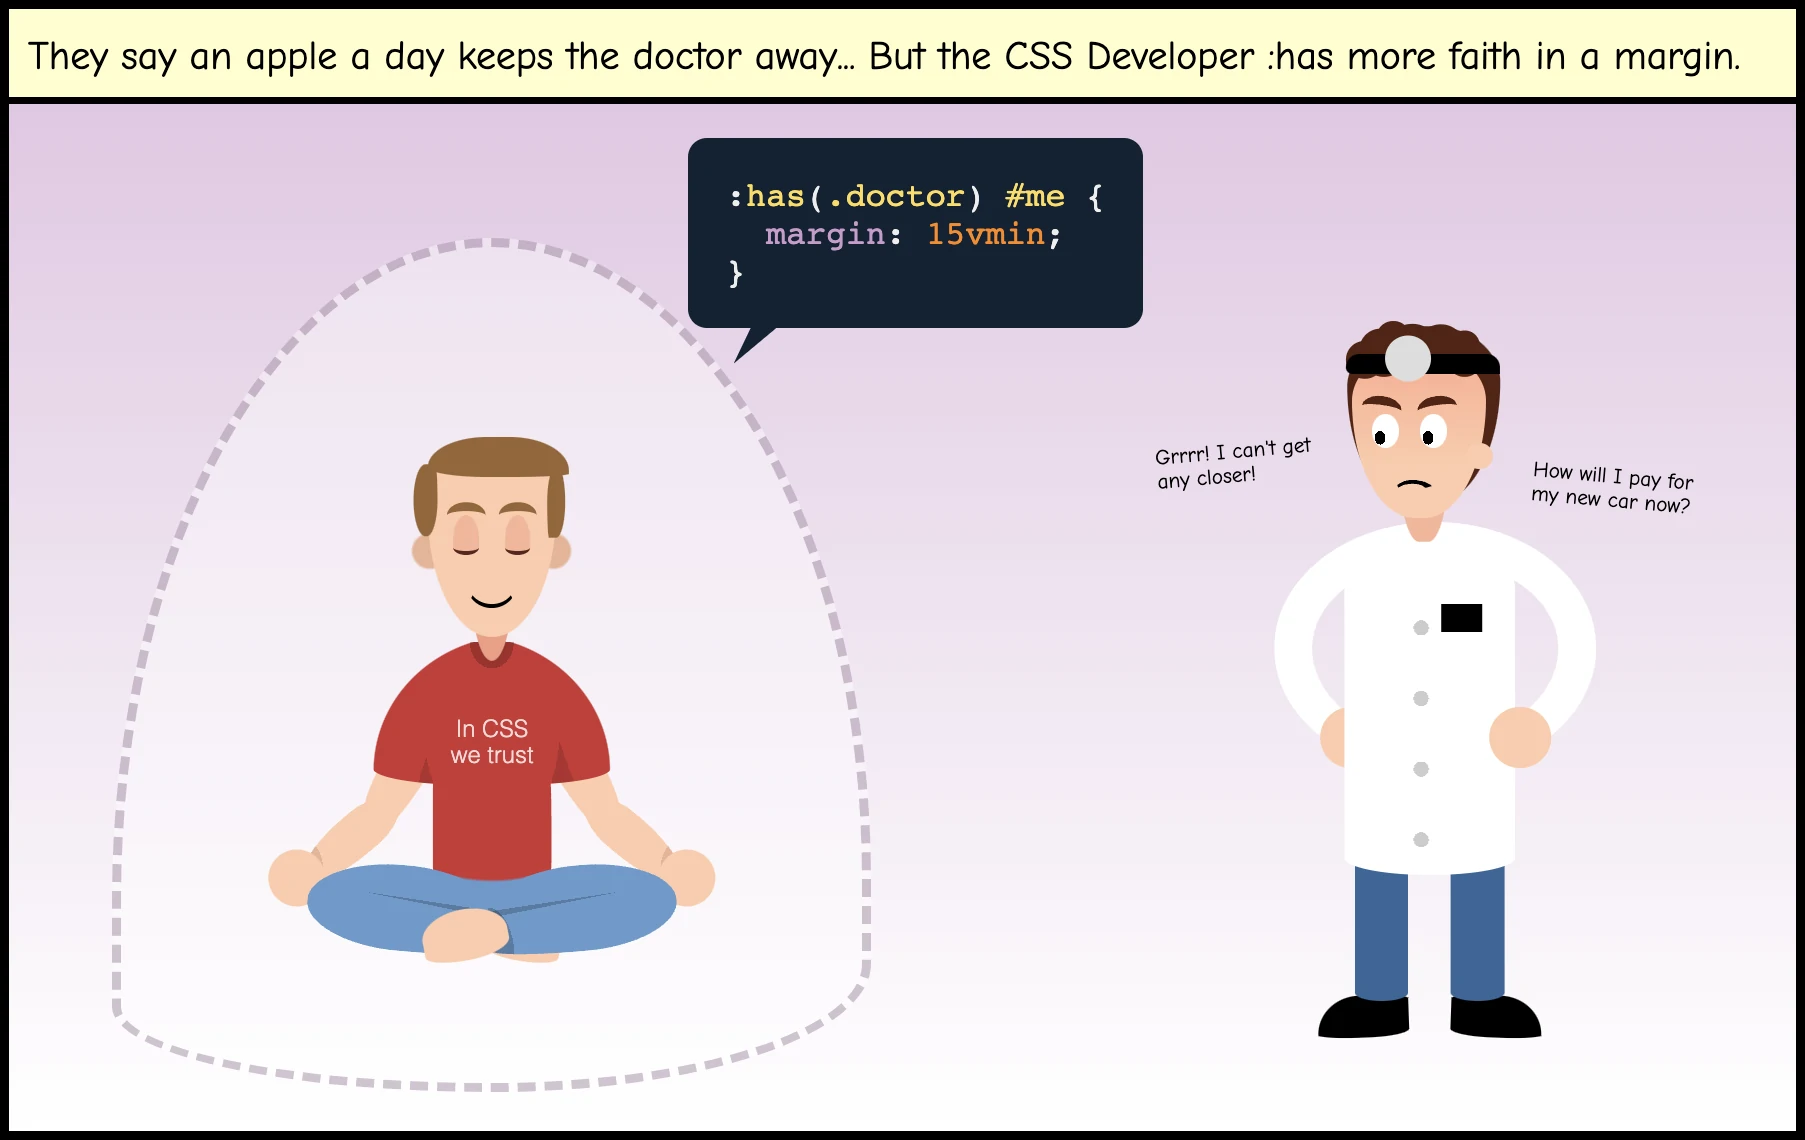 Cartoon with the title 'They say an apple a day keeps the doctor away... but the CSS Developer :has more faith in a margin'. A man doing yoga, his personal space highlighted with a border. There's a bubble with the CSS code: ':has(.doctor) #me { margin: 15vmin; }' And at a distance, there's an angry doctor who can't get closer.